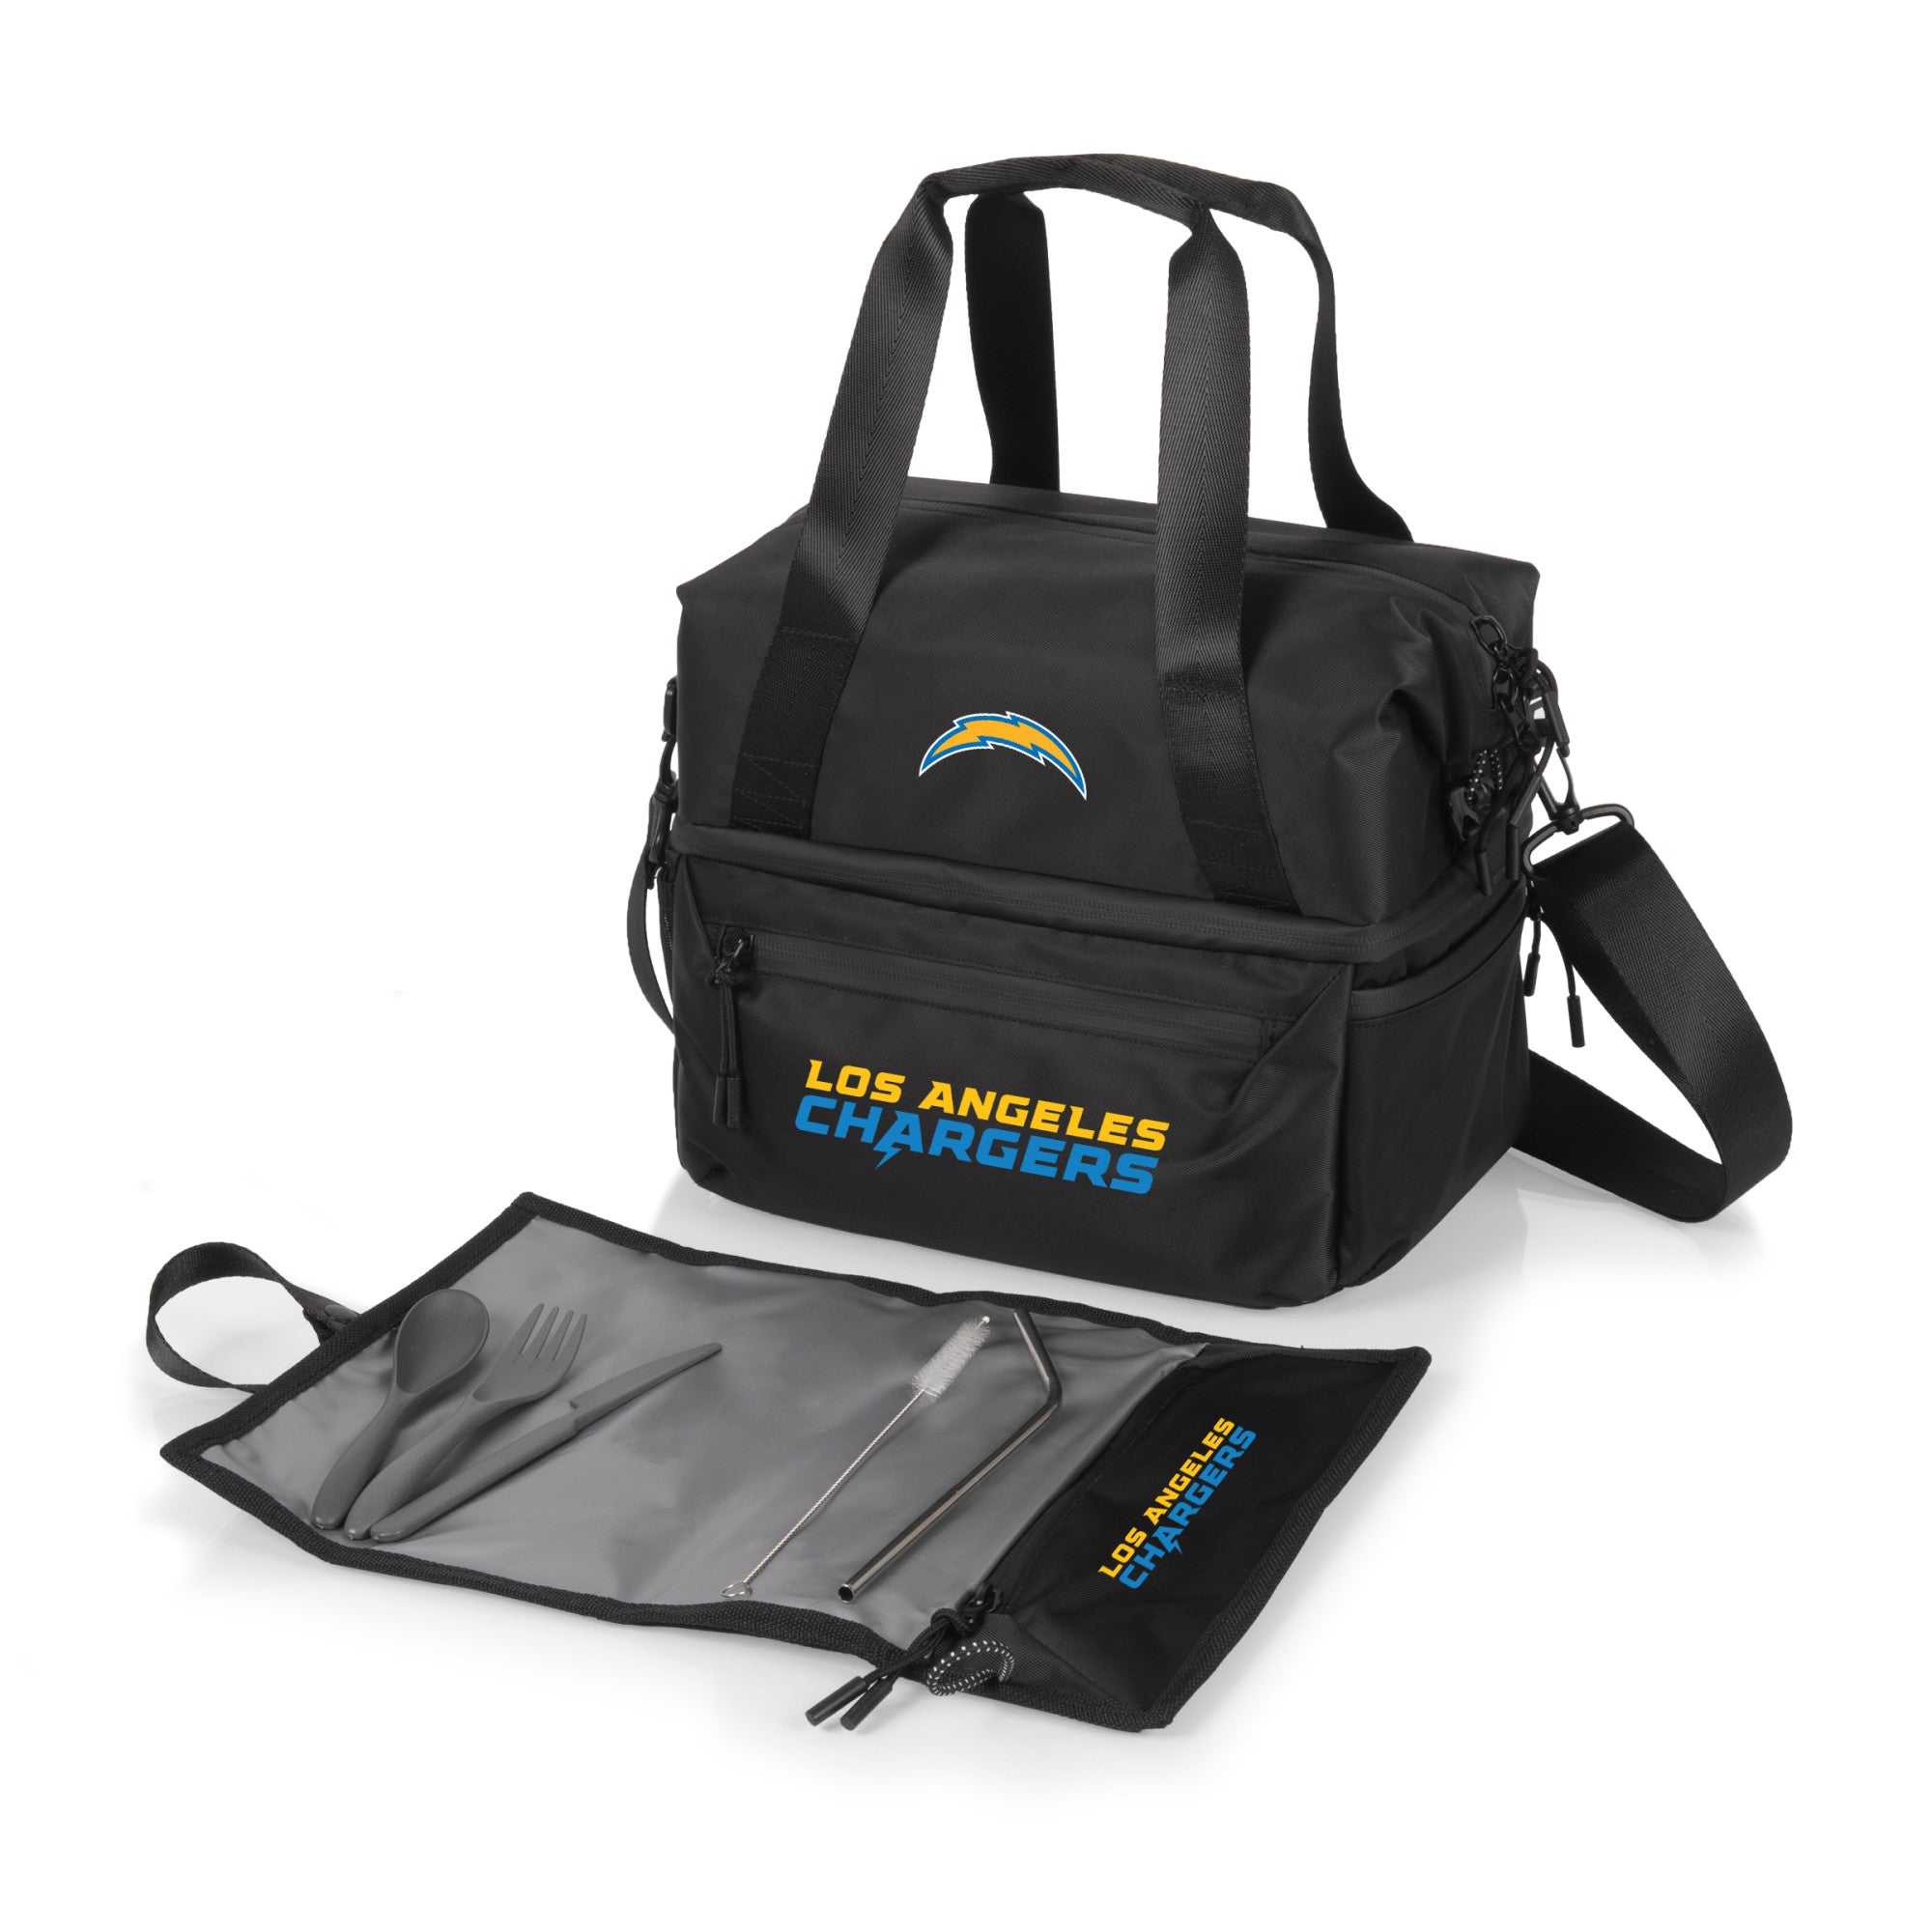 Los Angeles Chargers - Tarana Lunch Bag Cooler with Utensils